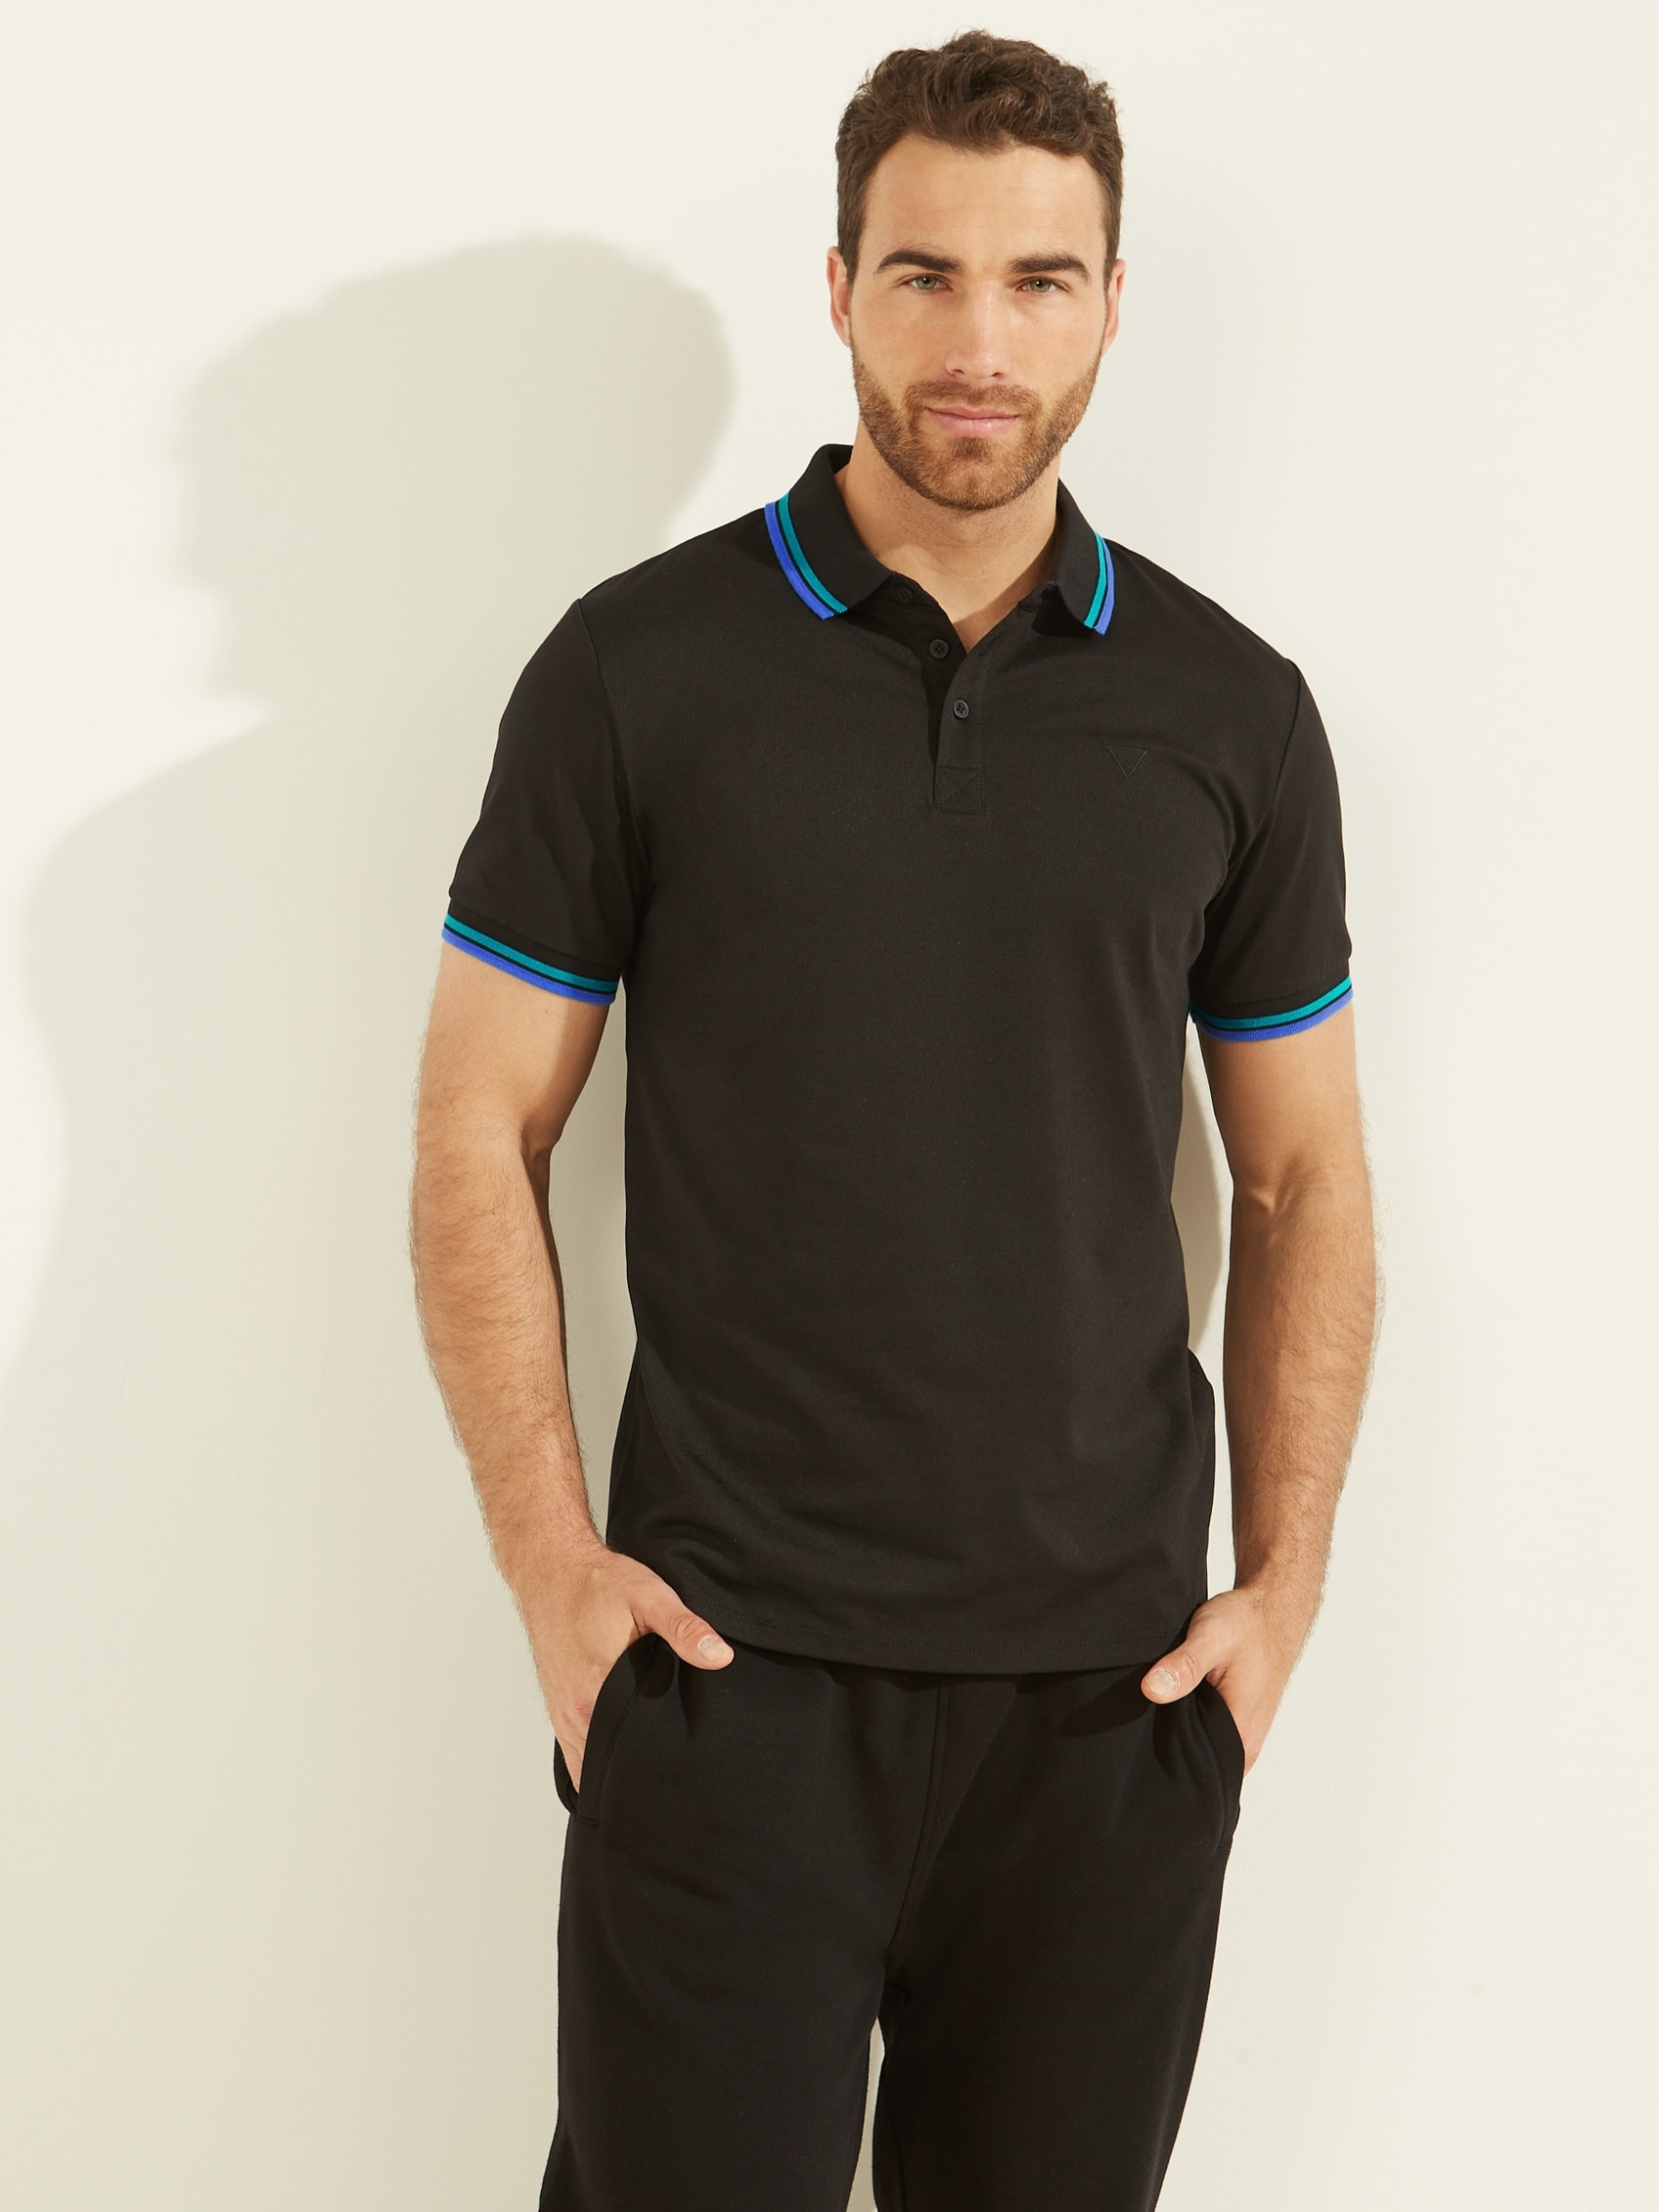 ESSENTIAL SPORTS PIQUE TRIANGLE POLO | Guess Philippines